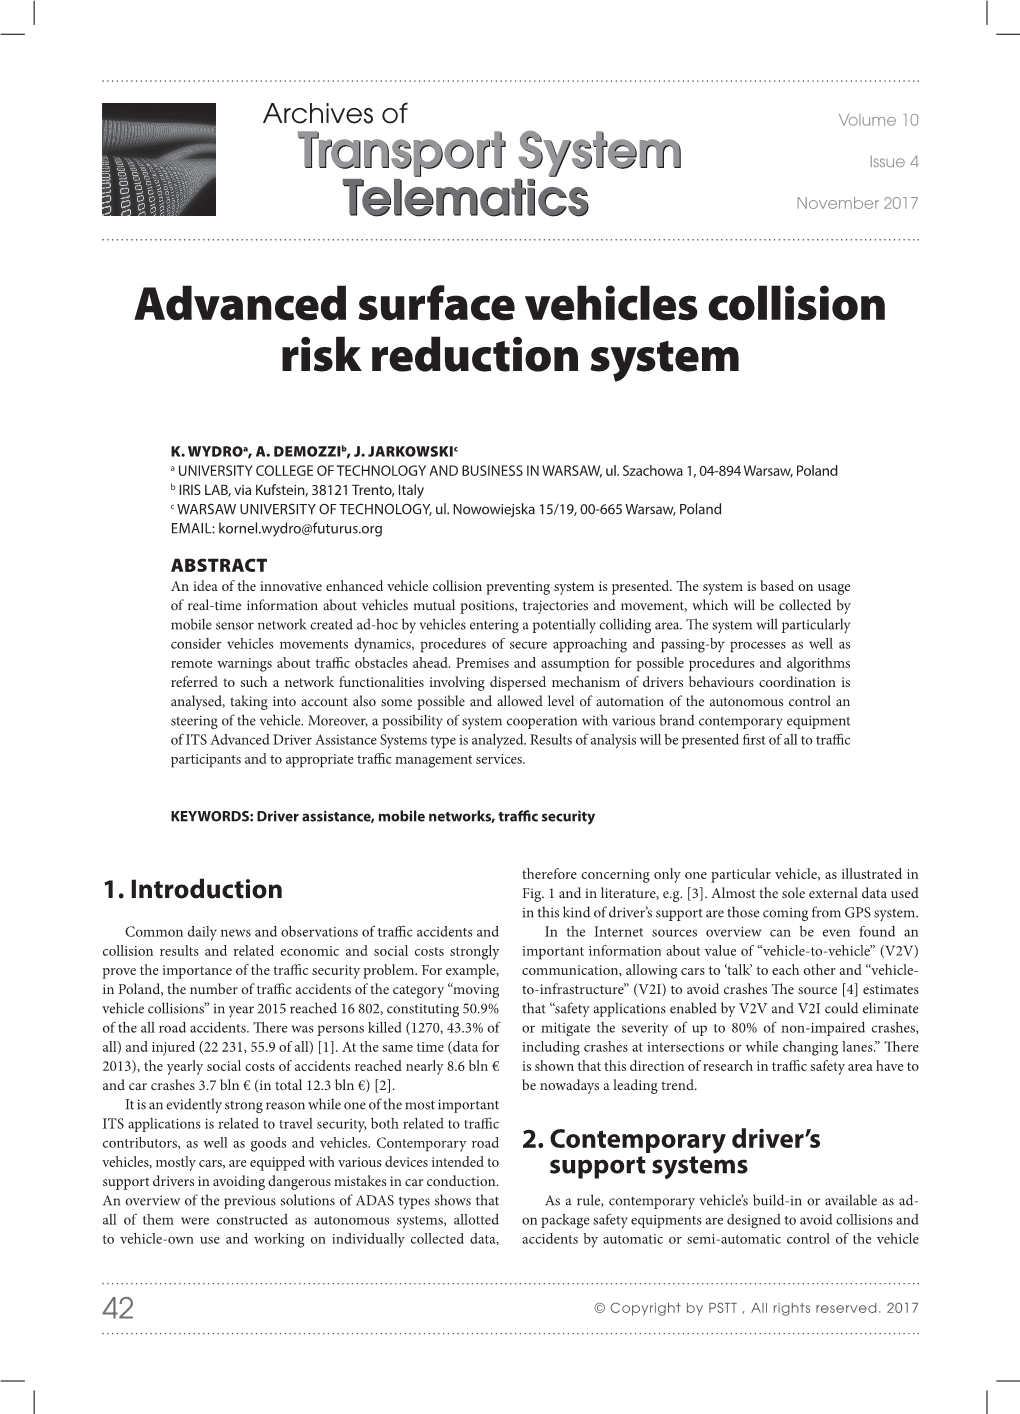 Telematics Transport System Advanced Surface Vehicles Collision